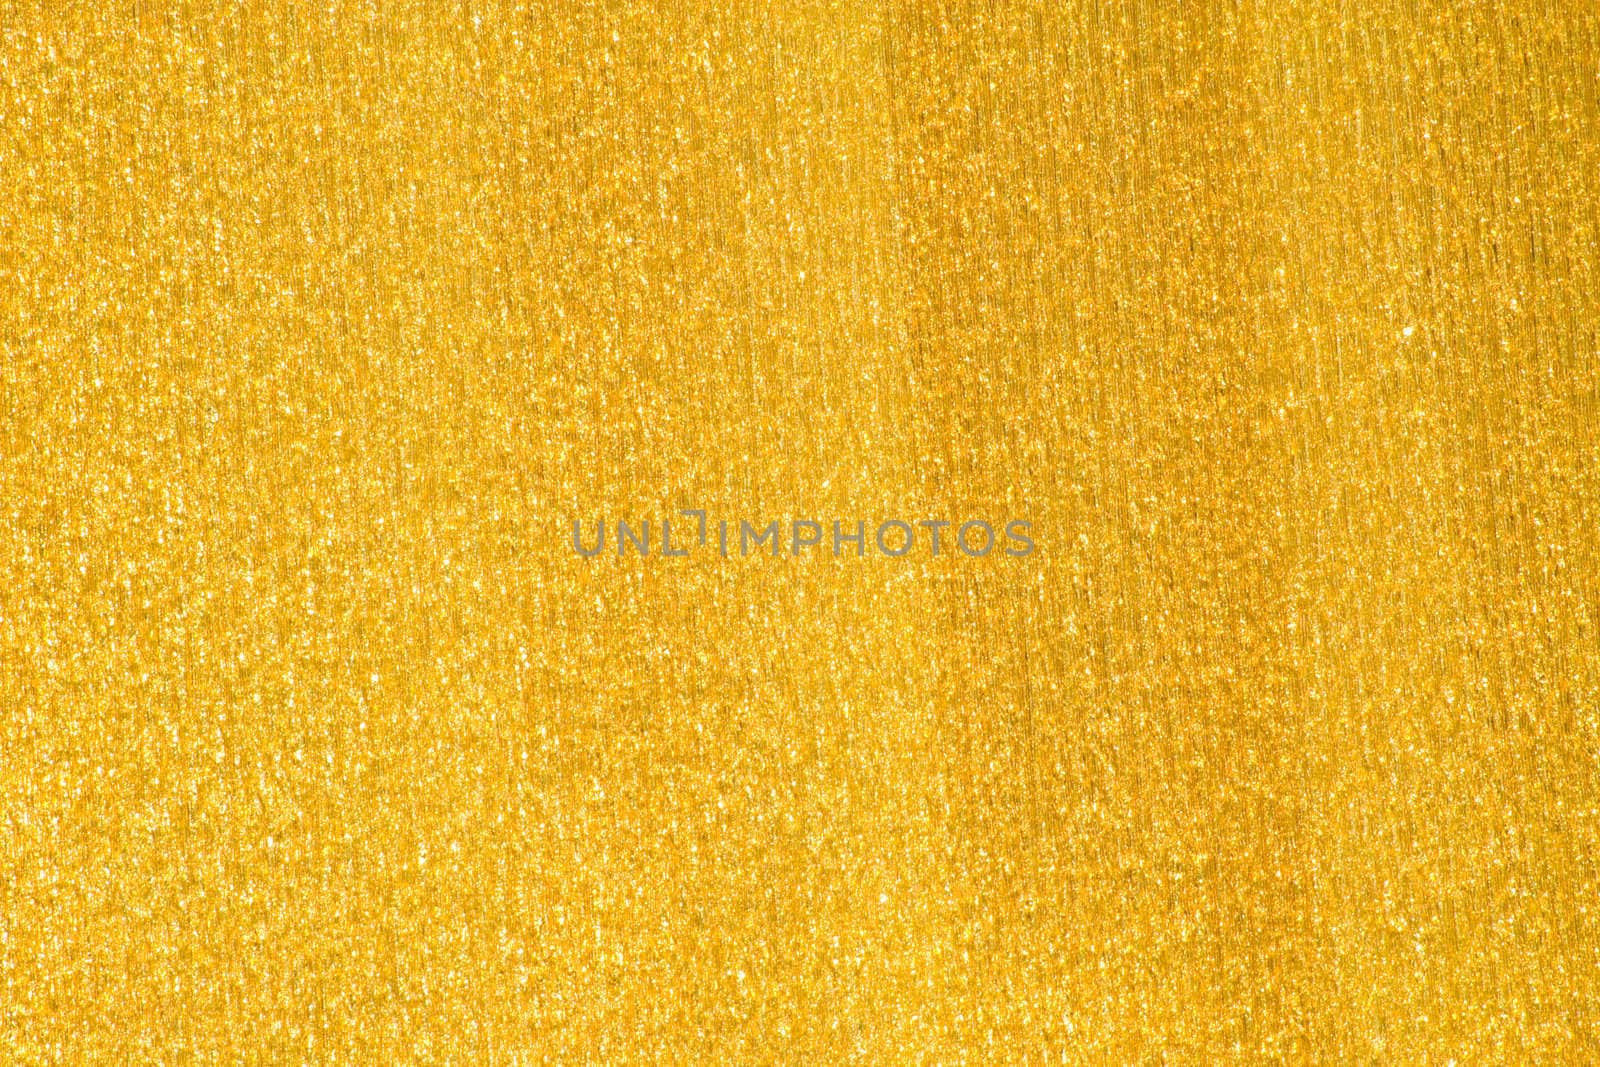 Abstract golden background - very detailed and real...